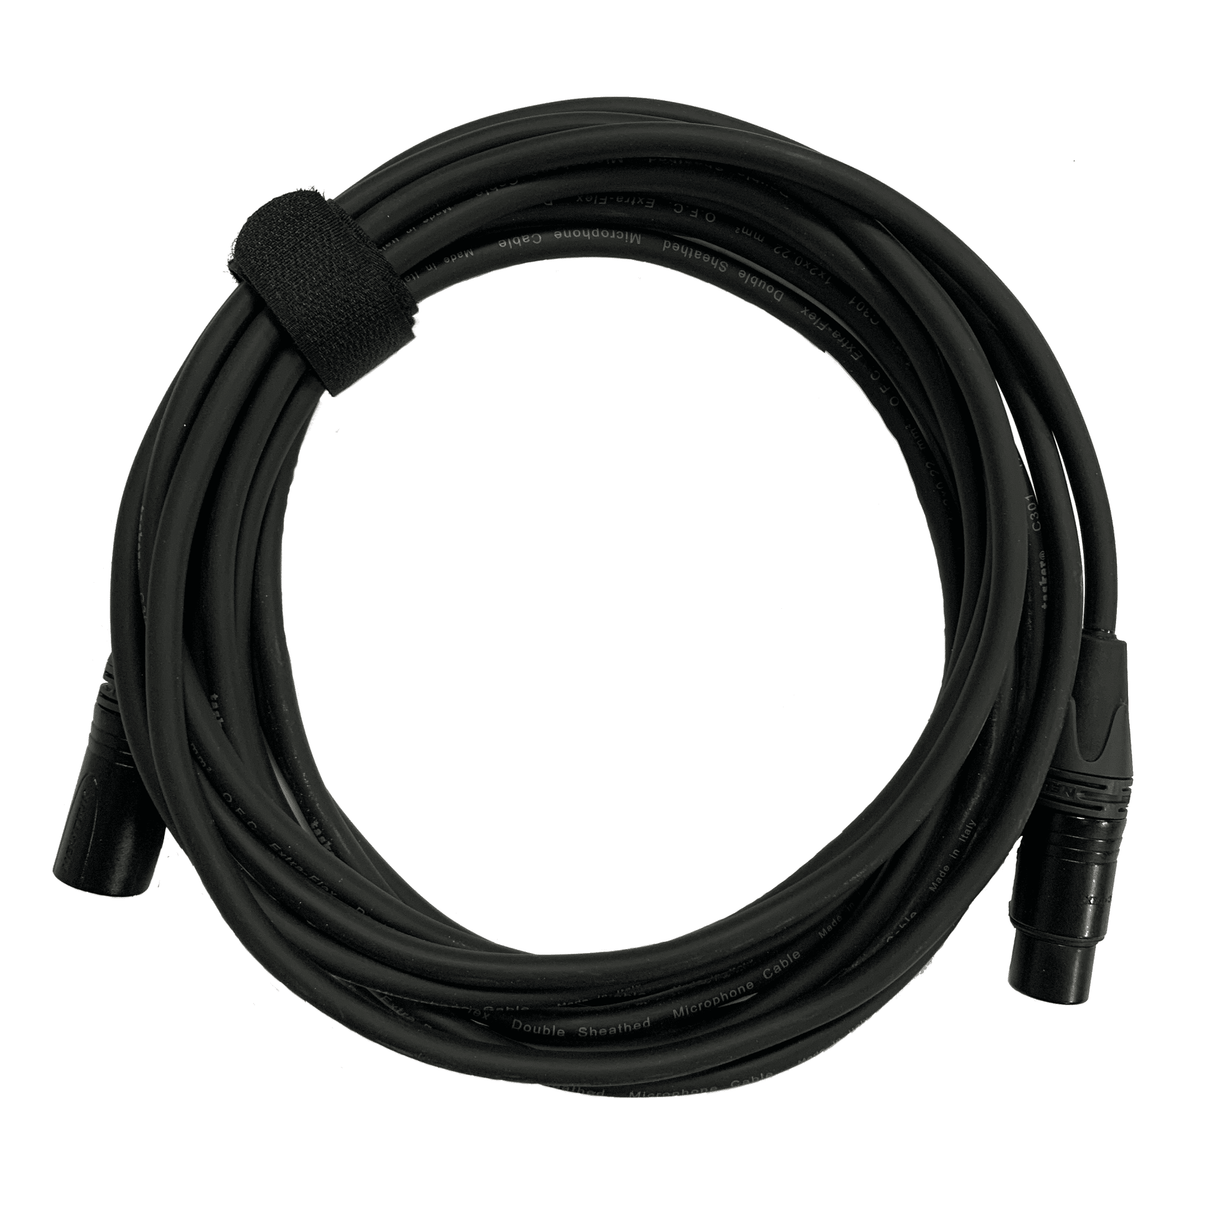 Rough Cable's XLR Cable A+ quality | 10 meters